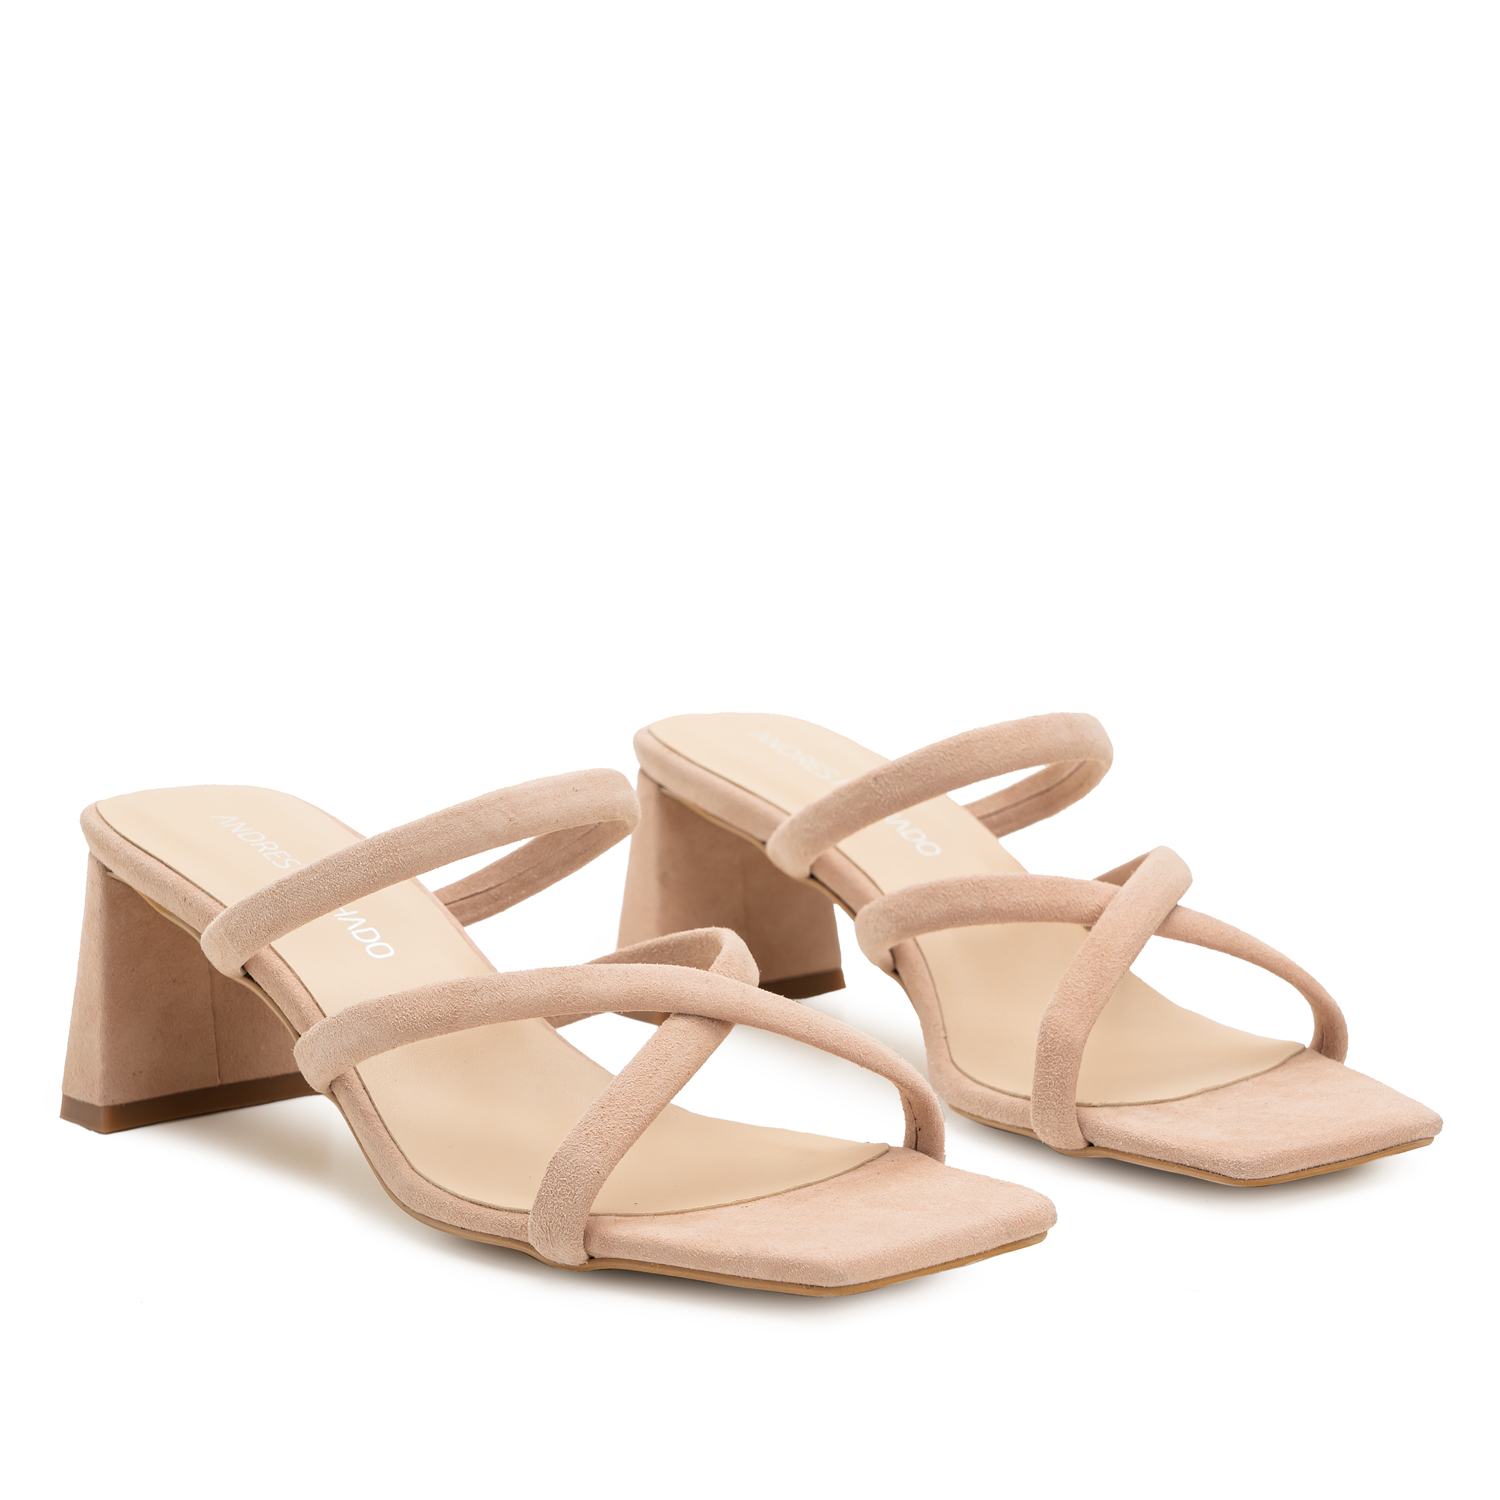 Heeled Mules in Beige Split Leather with Square Toe 